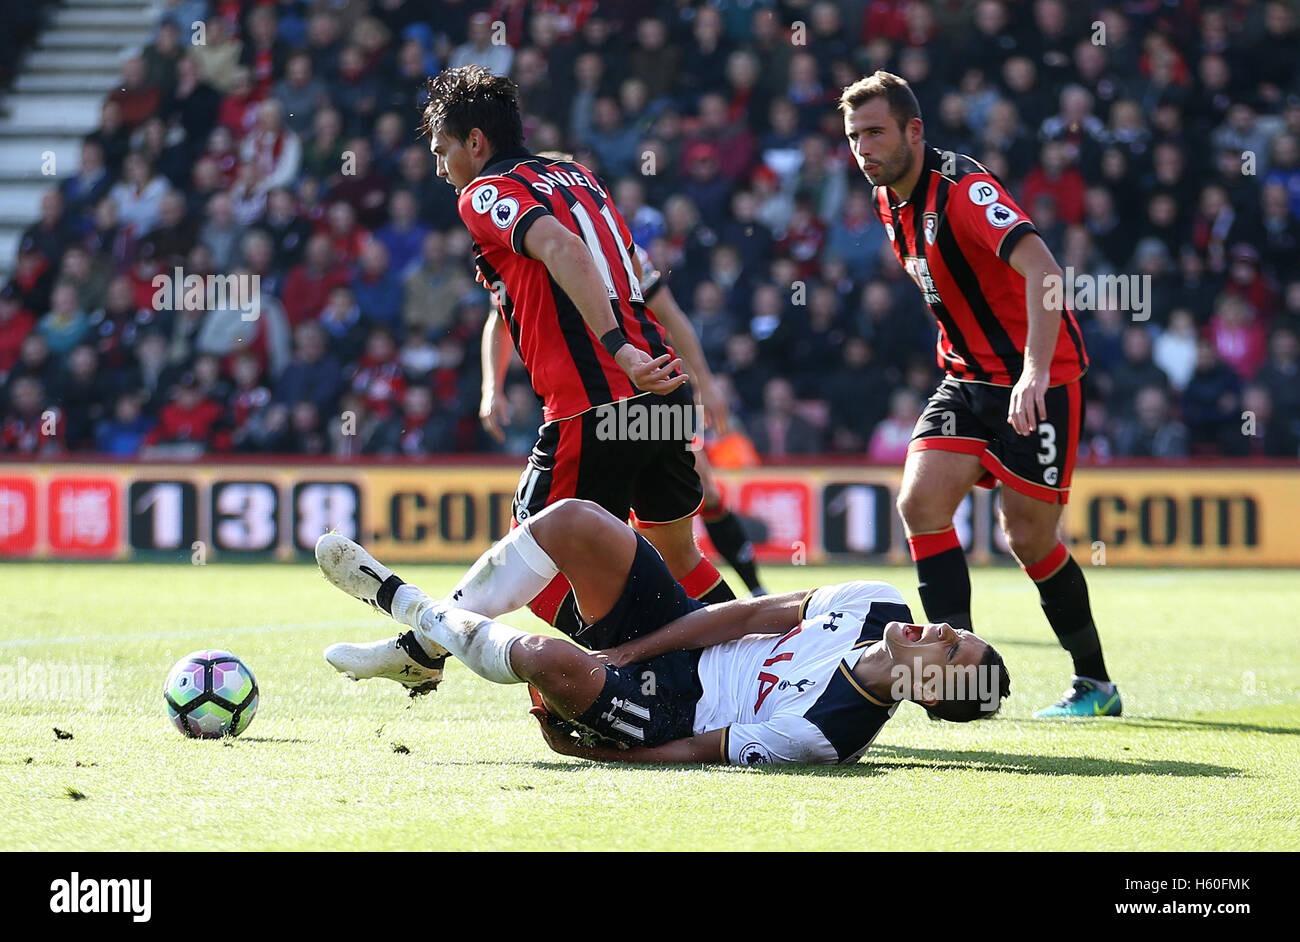 Tottenham Hotspur's Erik Lamela goes to ground in the penalty area after a challenge by AFC Bournemouth's Charlie Daniels during the Premier League match at the Vitality Stadium, Bournemouth. Stock Photo